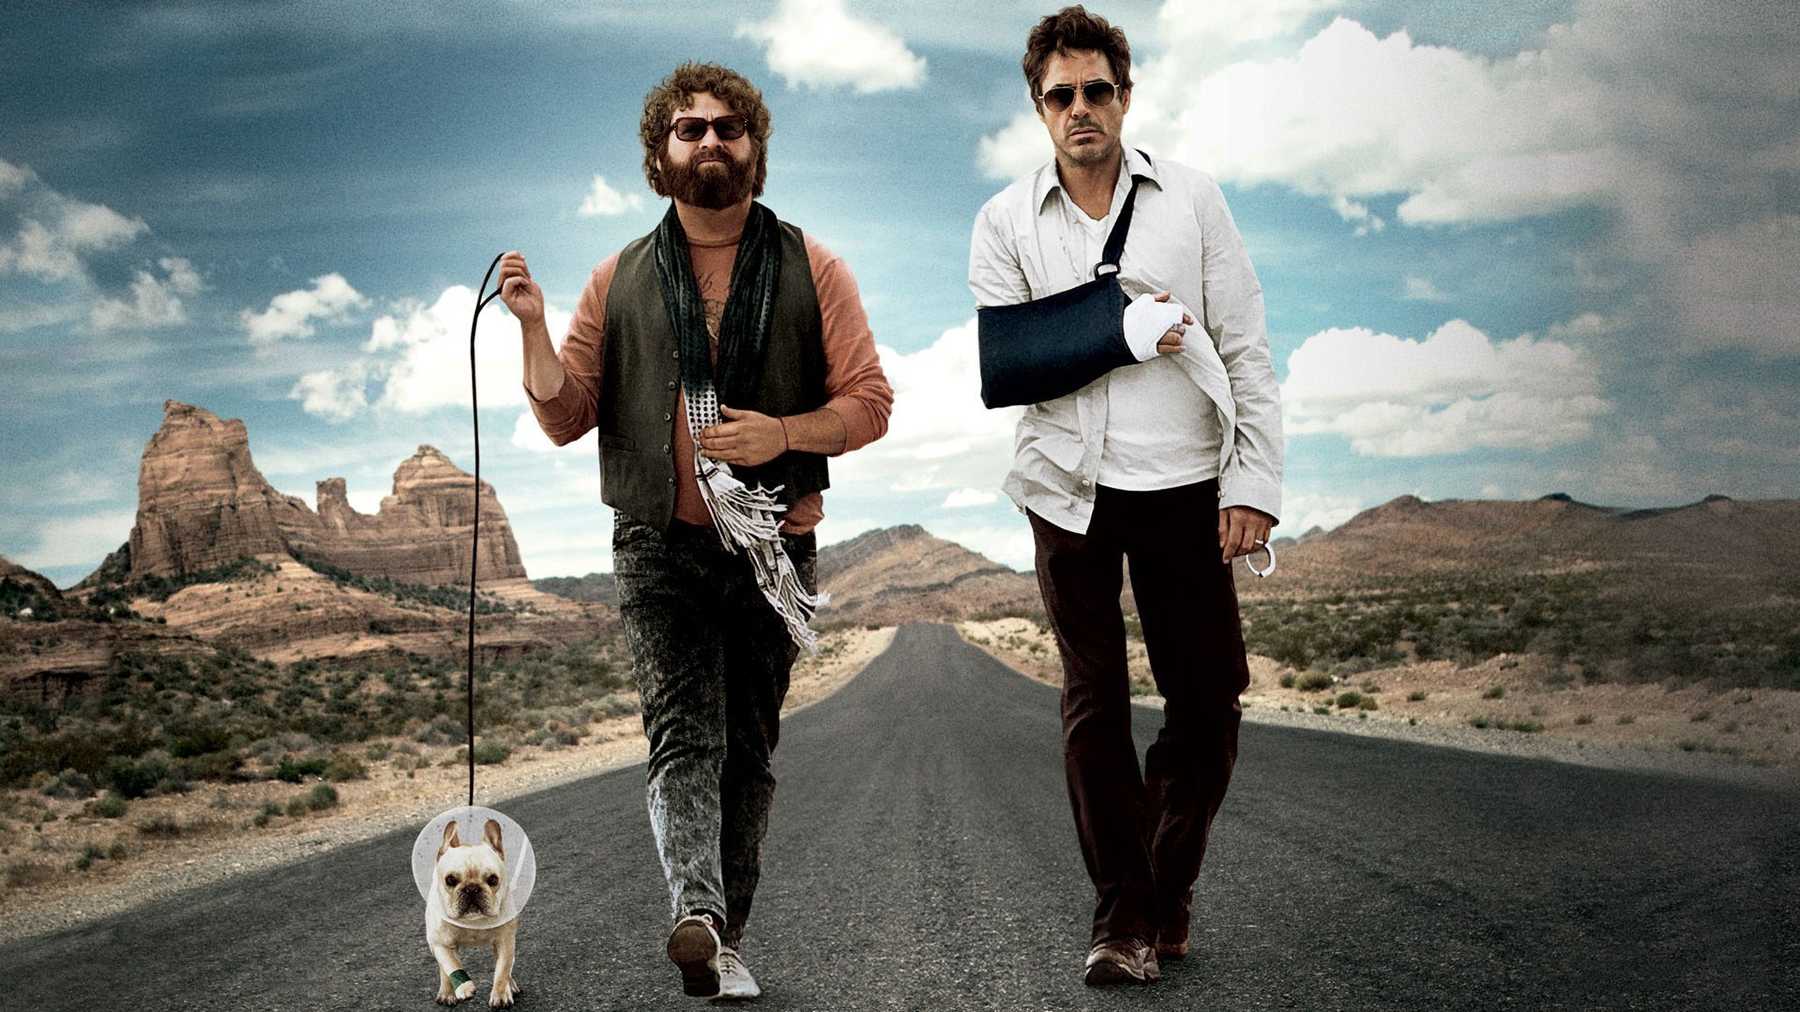 due date movie download in tamil